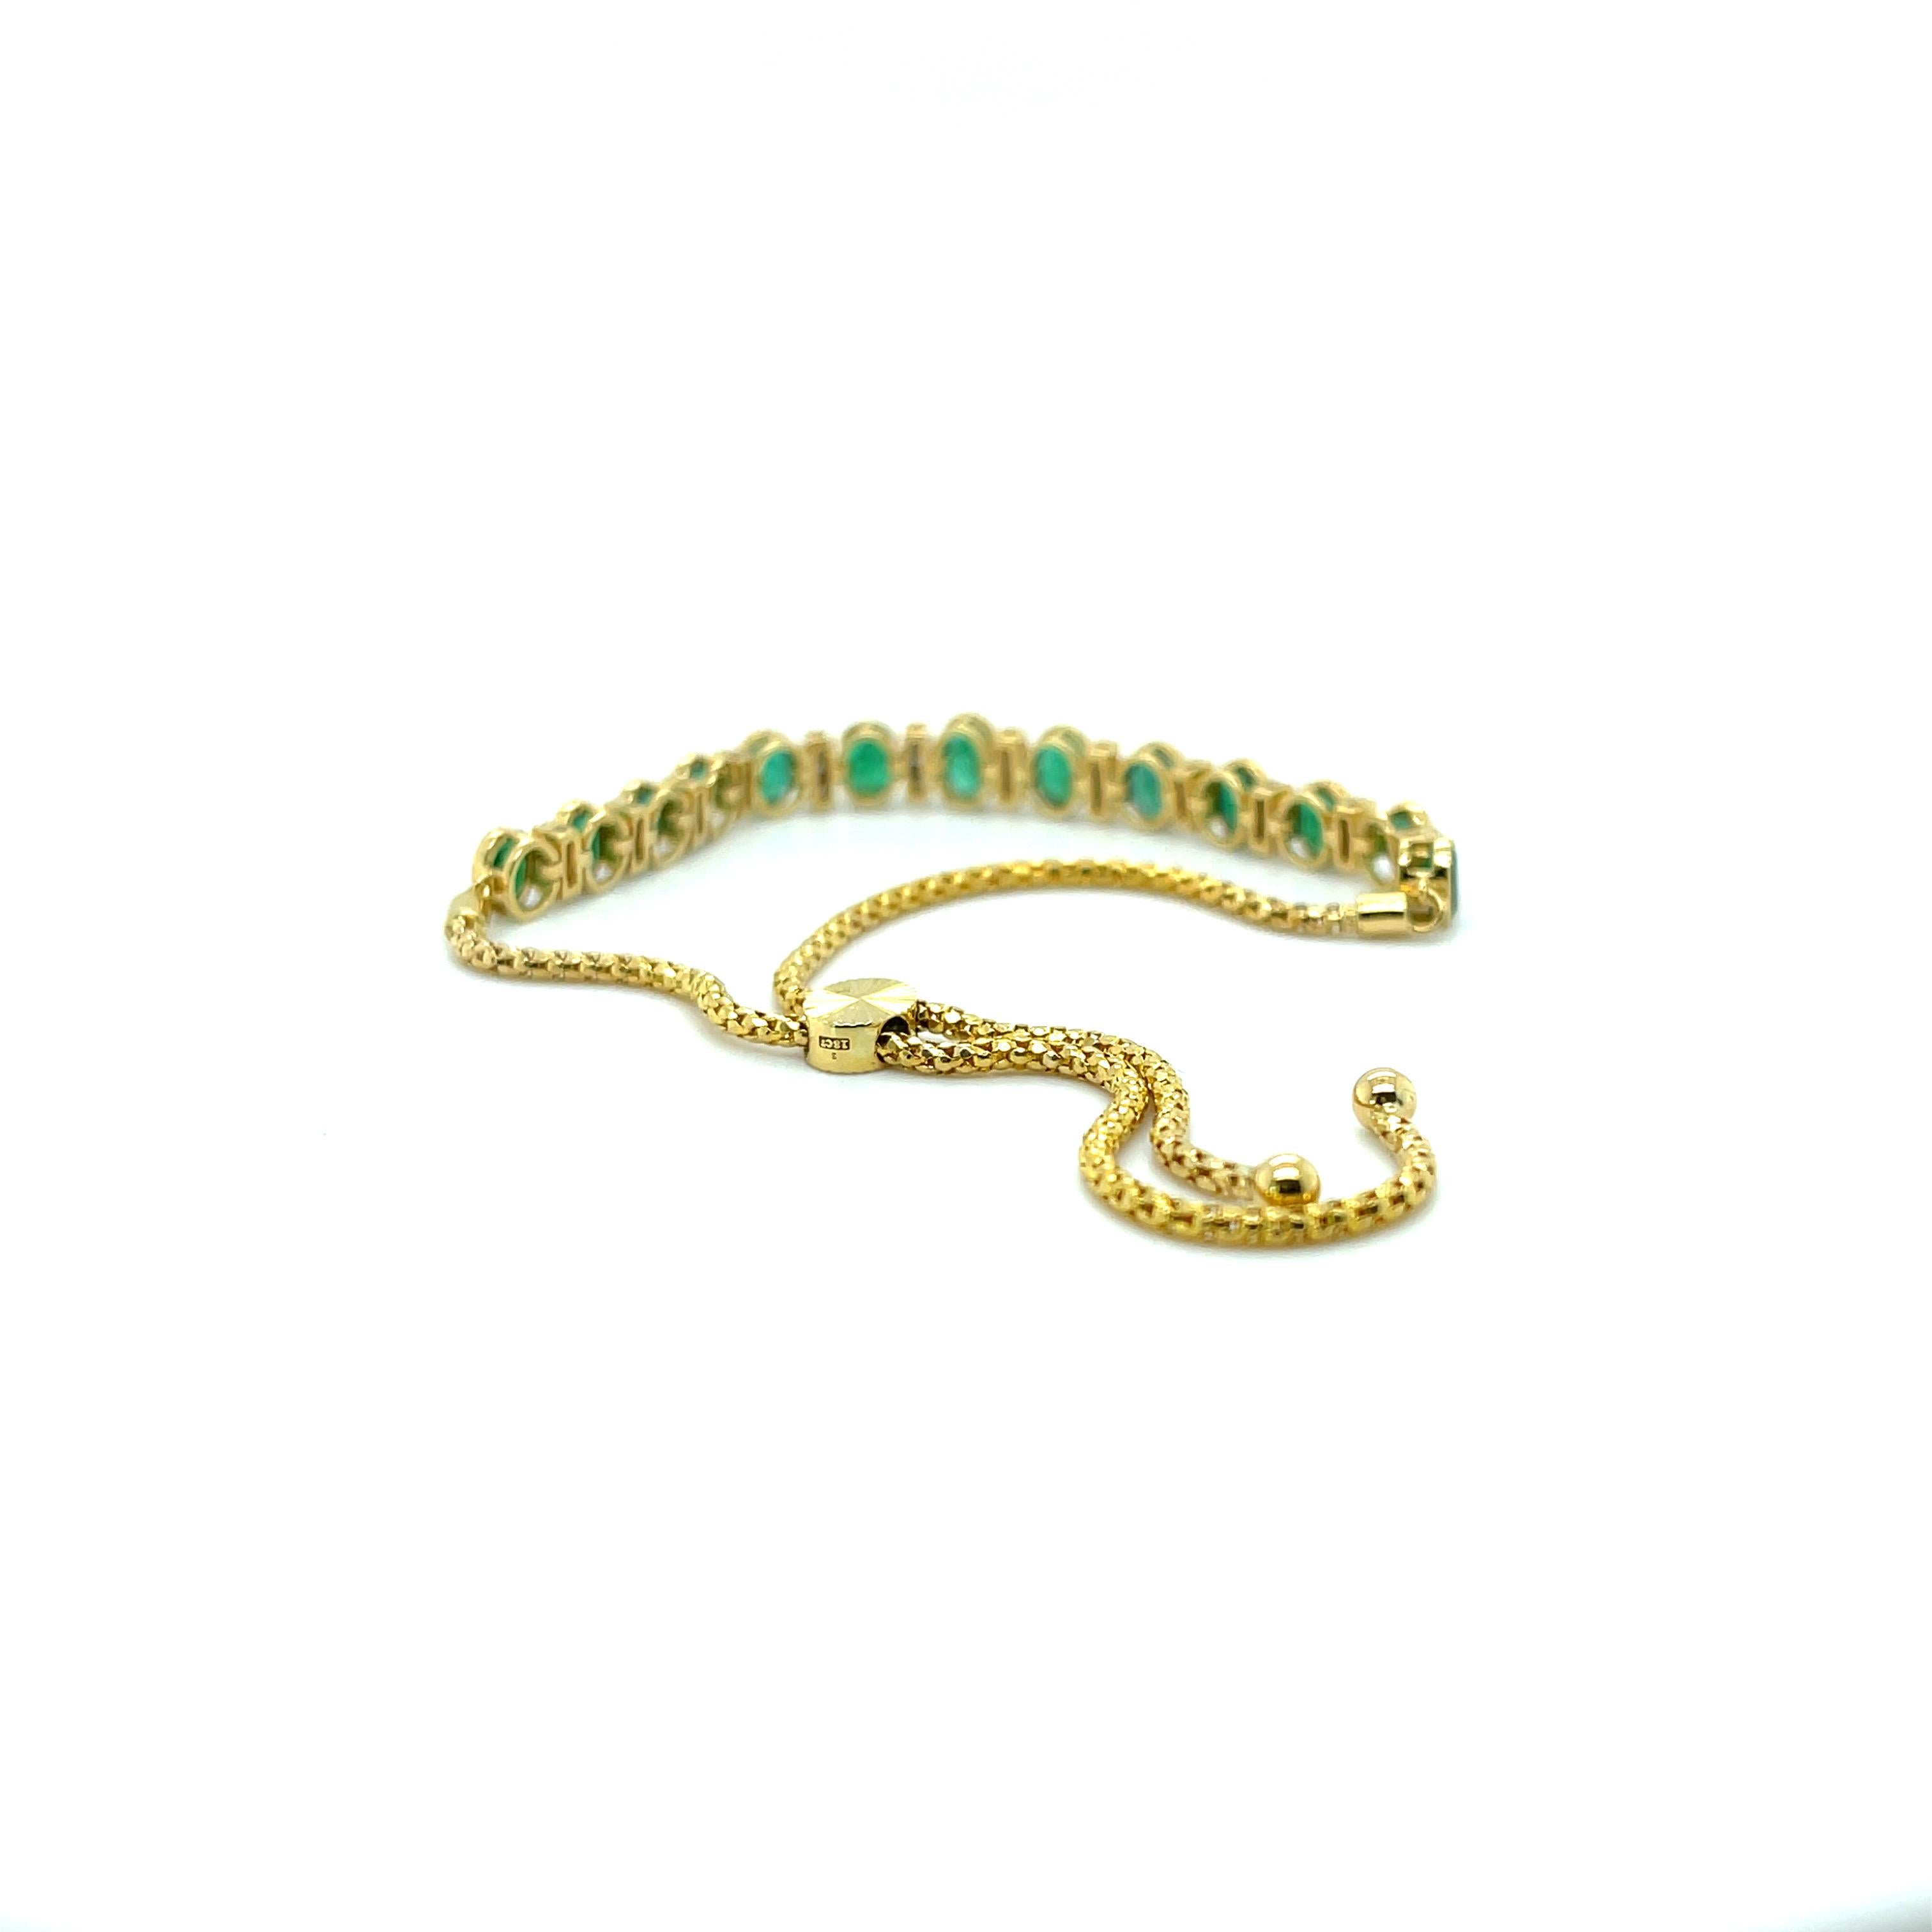 Natural Emeralds and Diamonds, gorgeously crafted in eighteen karat yellow gold, complemented by a stunning polished finish design. Expandable bracelet to fit all wrist sizes. 

One ladies - 18ct yellow gold fancy link chain bracelet, polished